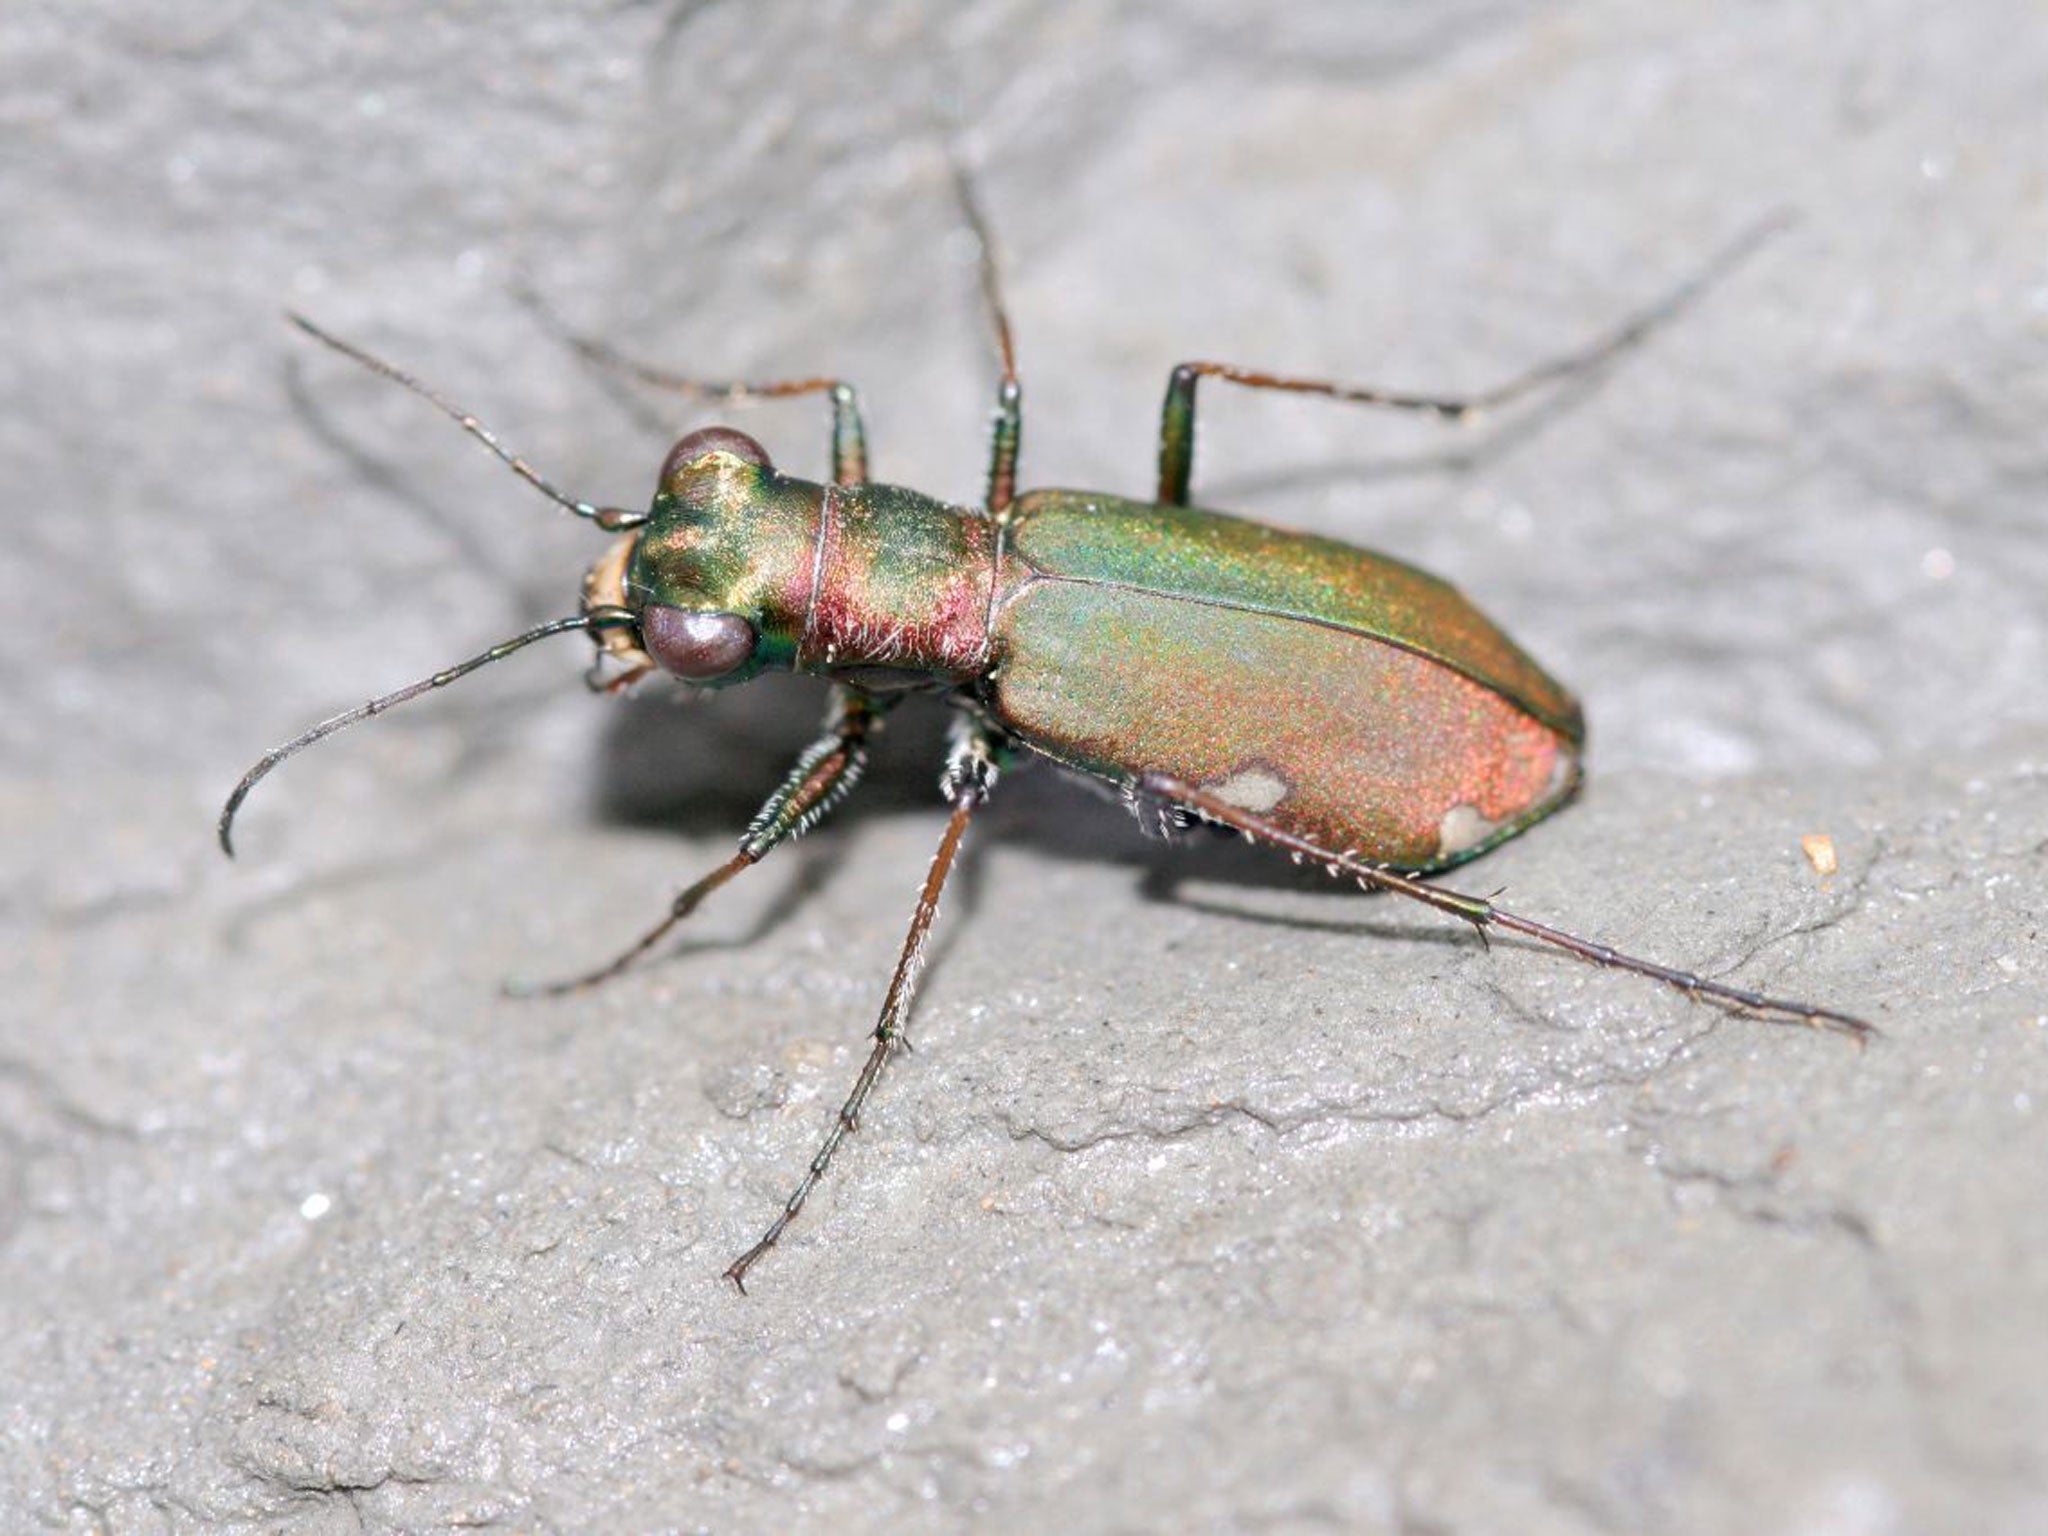 Cliff tiger beetle: Is unable to move if conditions become difficult through storms or development